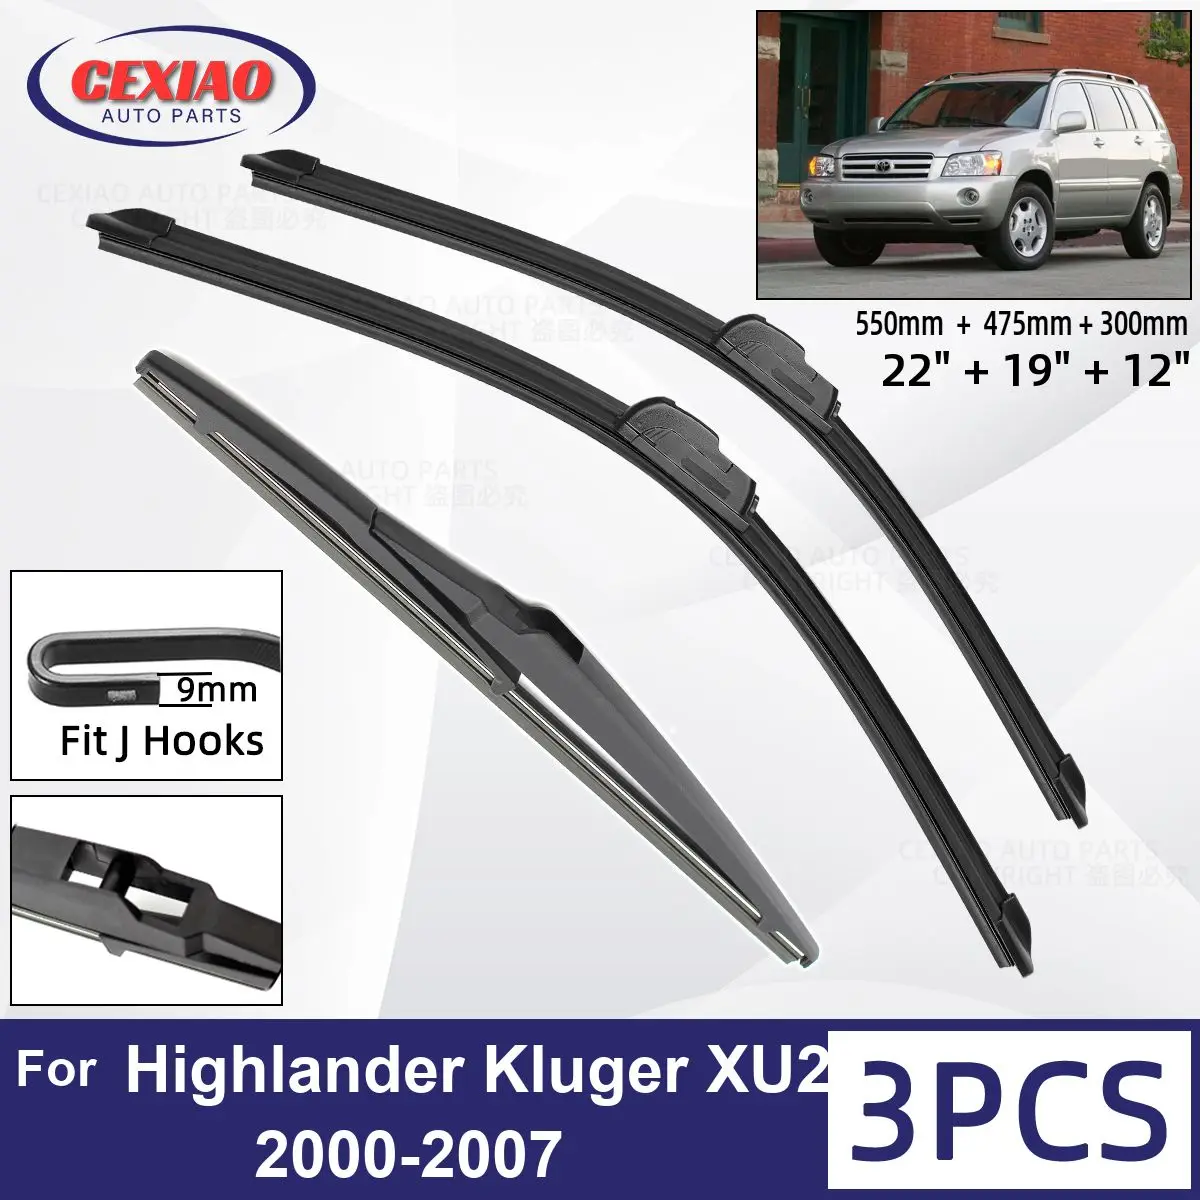 

For Toyota Highlander Kluger XU20 2000-2007 Car Front Rear Wiper Blades Soft Rubber Windscreen Wipers Auto Windshield 22"19"12"